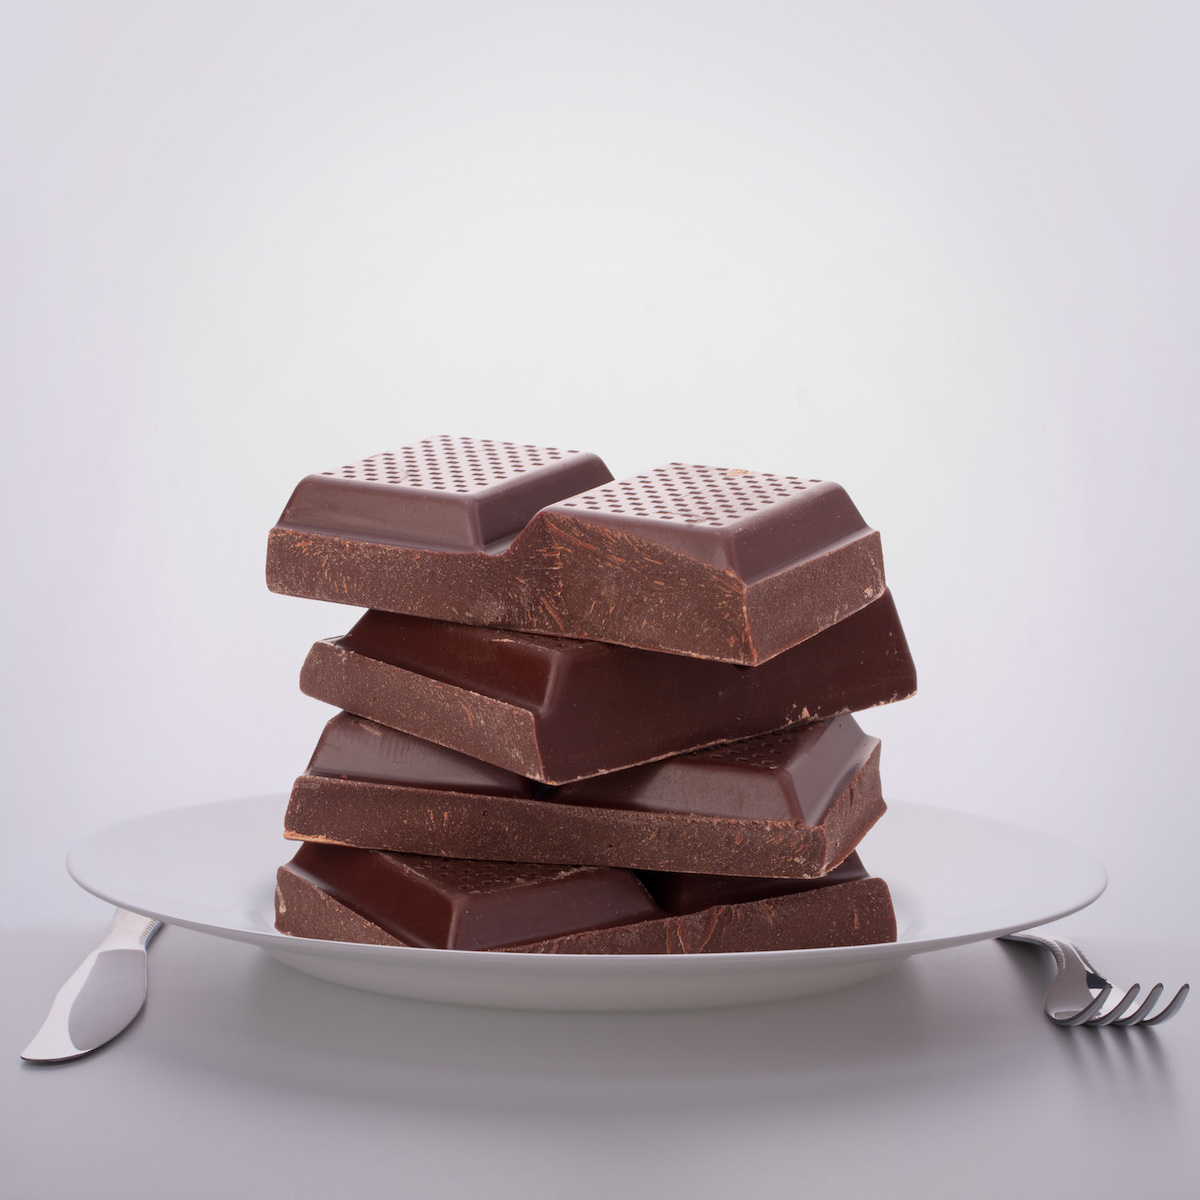 From Cocoa to Chocolate: Chocolateros.net Makes Your Dreams Come True